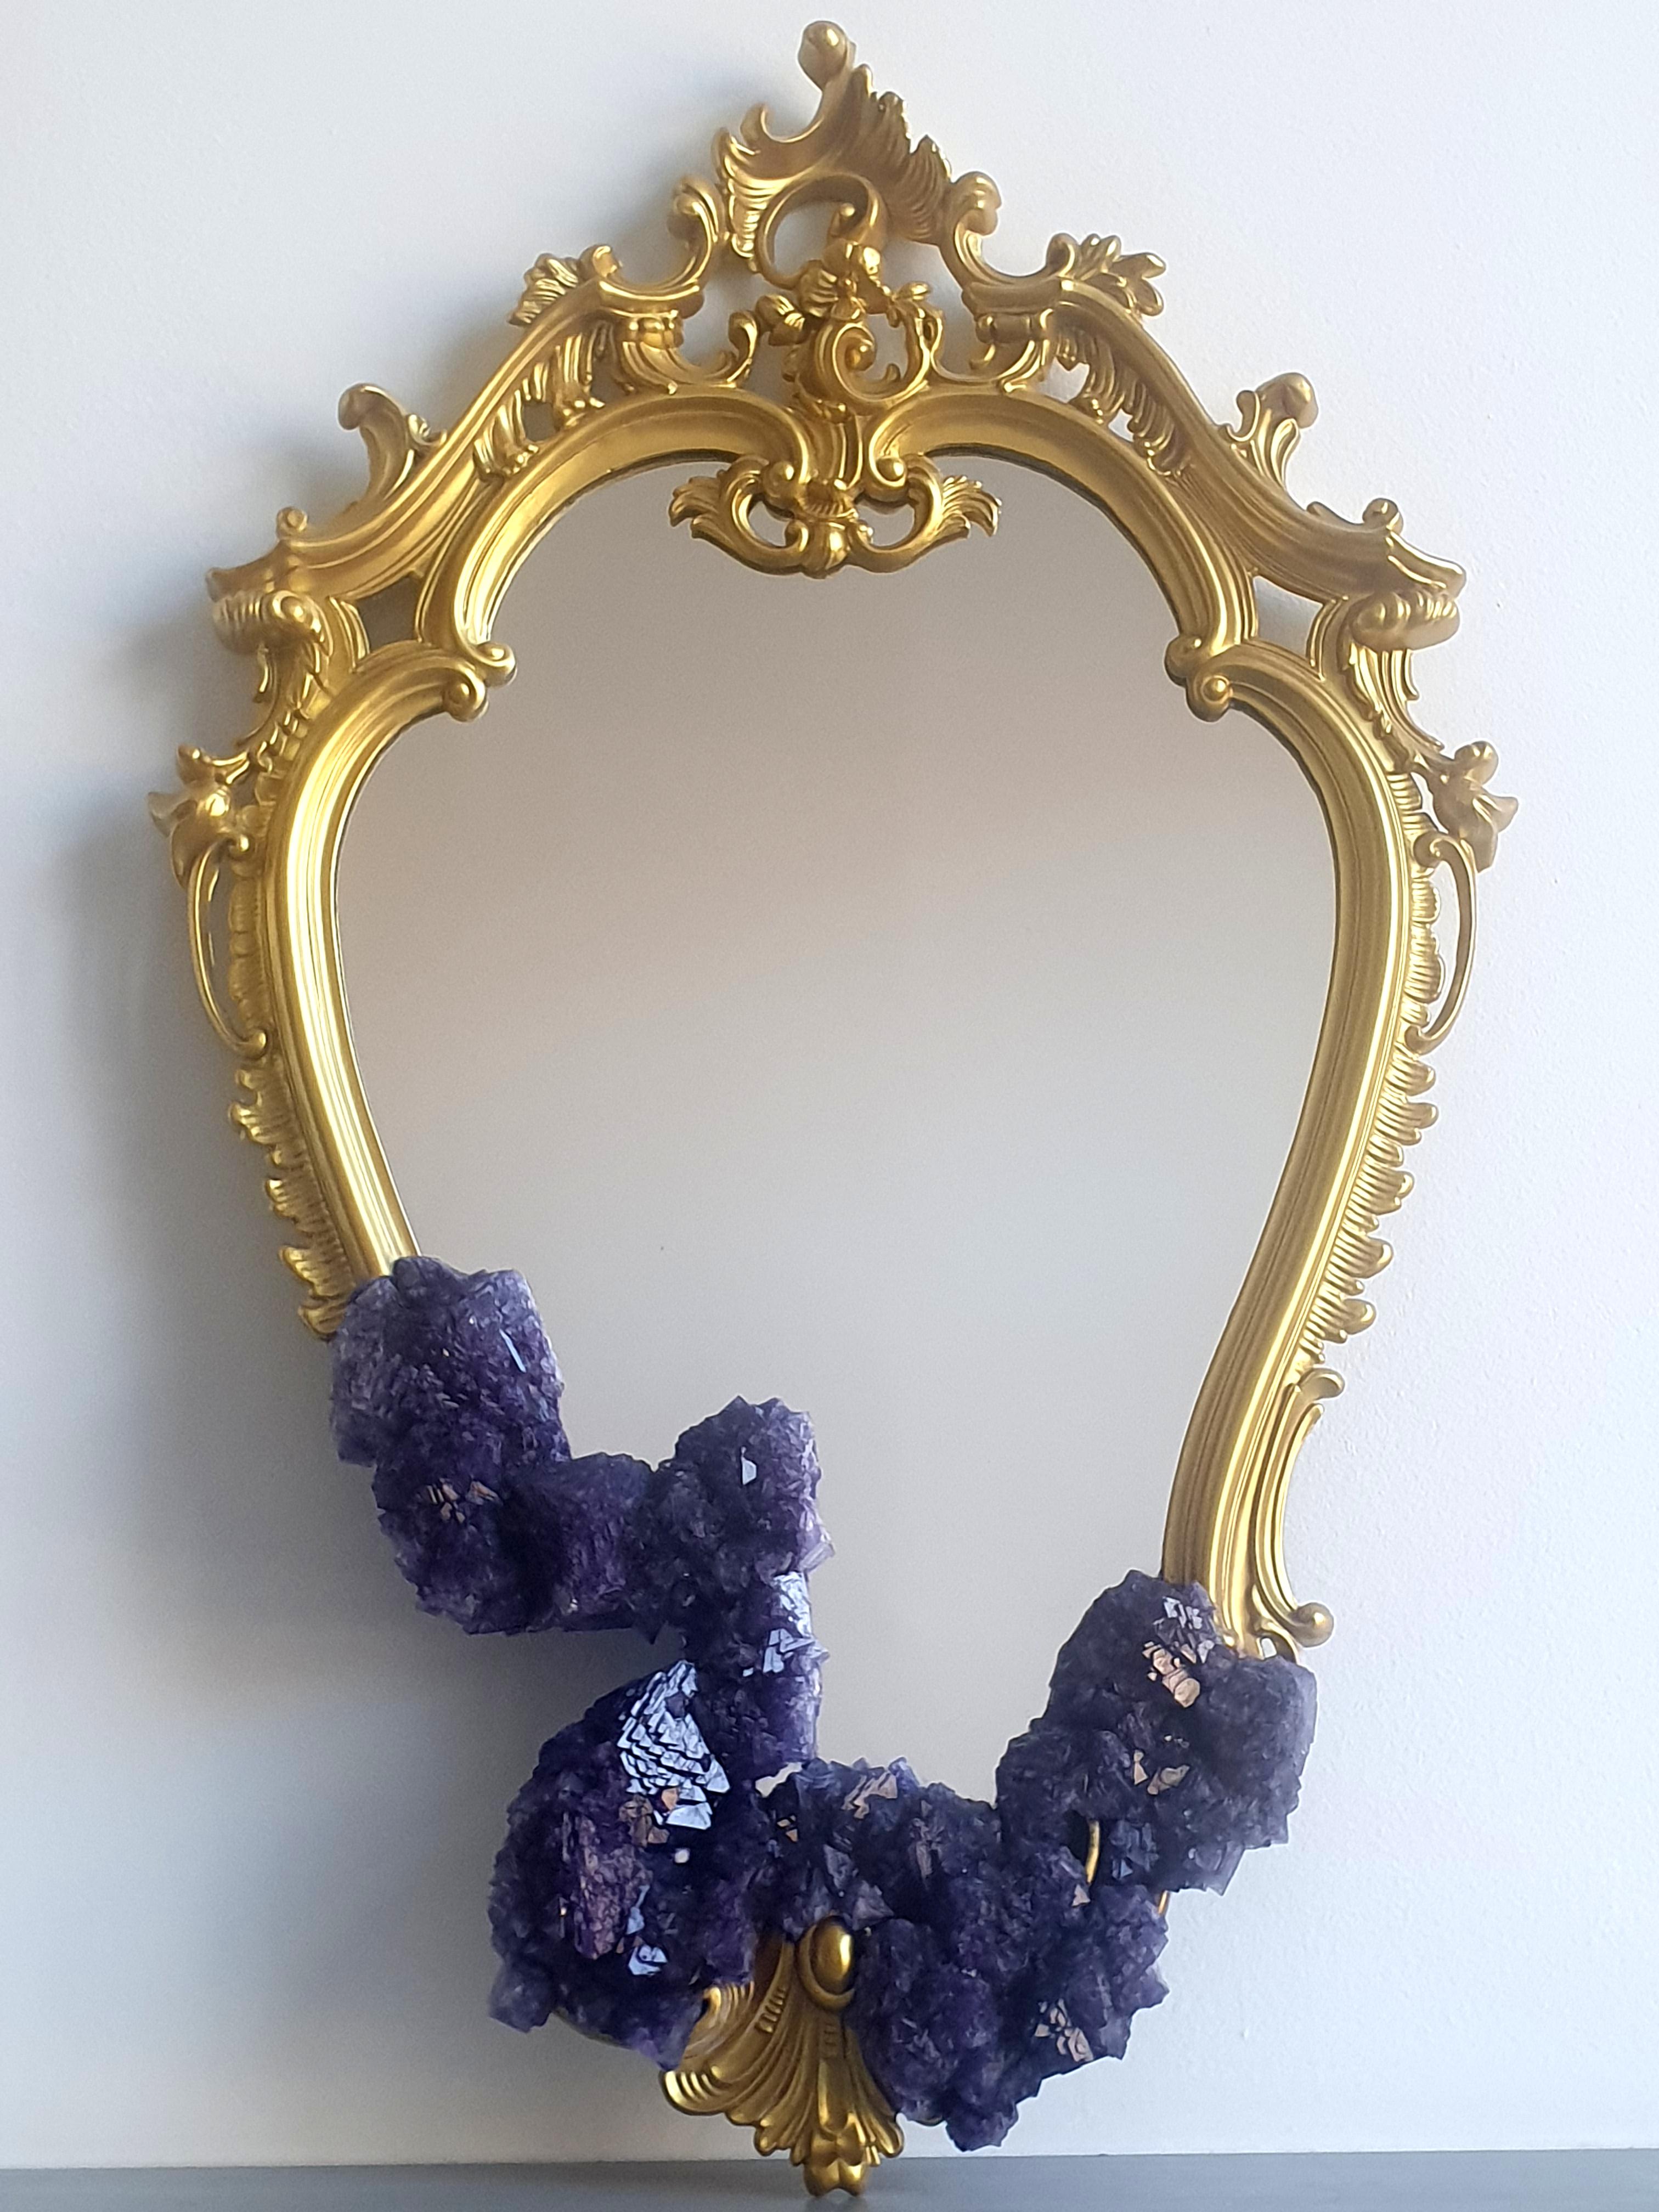 Classic Crystallized mirror by Mark Sturkenboom
Dimensions : L 90 x W 52cm
Materials: Metal and natural crystals

Mark Sturkenboom (Driebergen, 1983) is an artist that graduated with honors in 2012 at Artez Academy for the Arts in